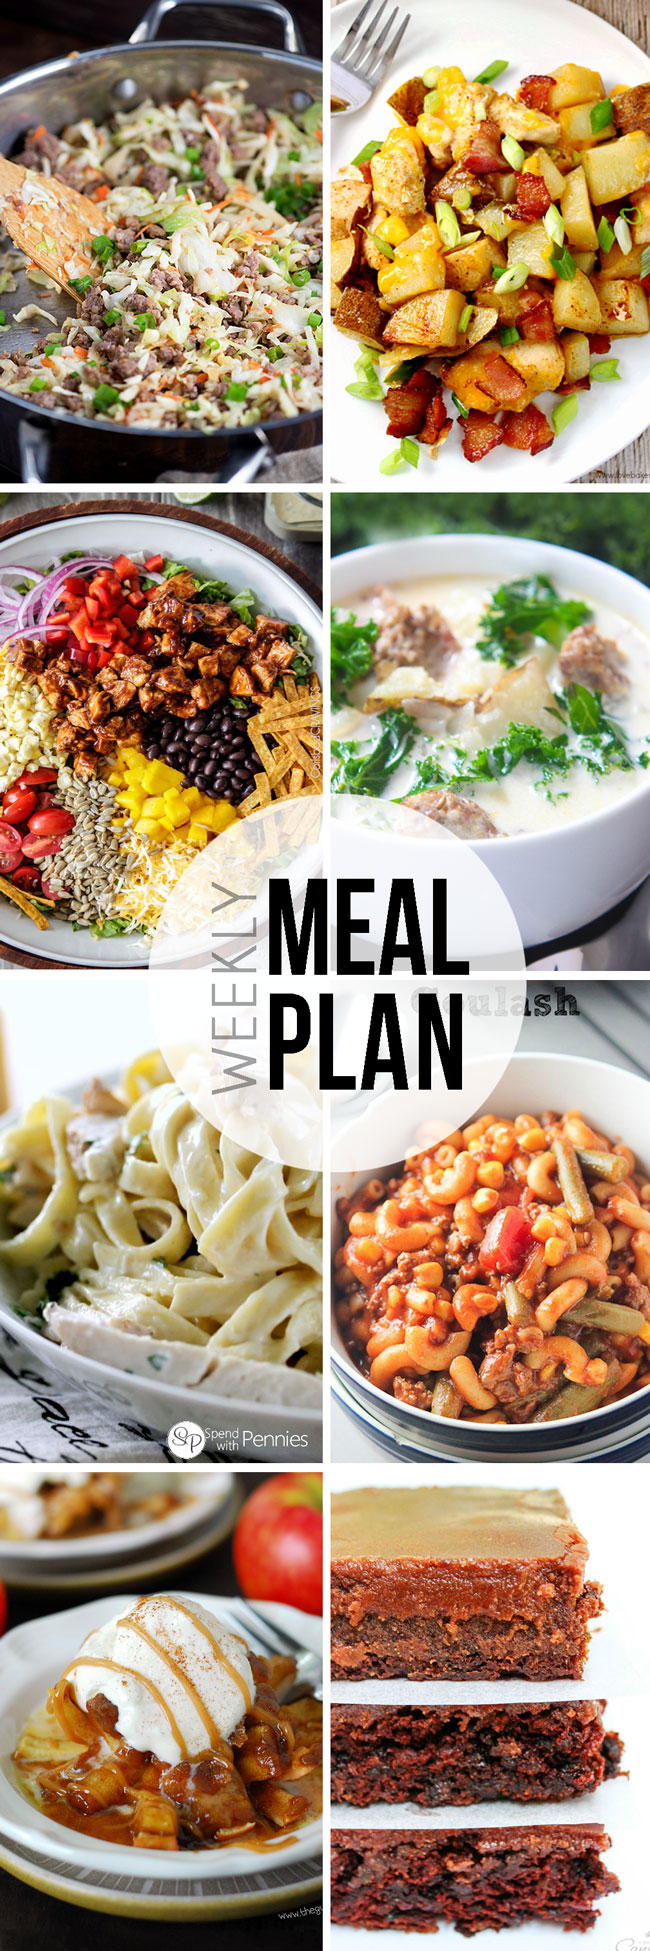 Easy Meal Plan Sunday #12.